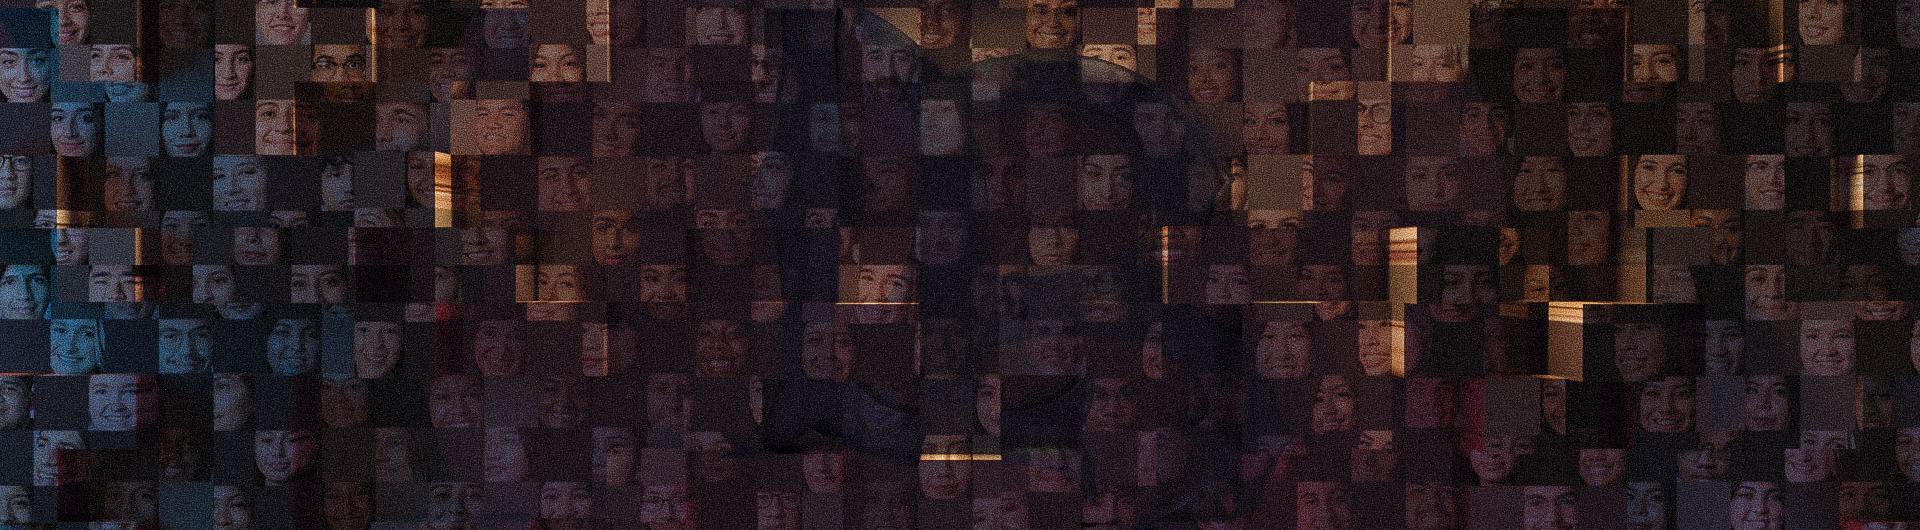 COLLAGE of faces